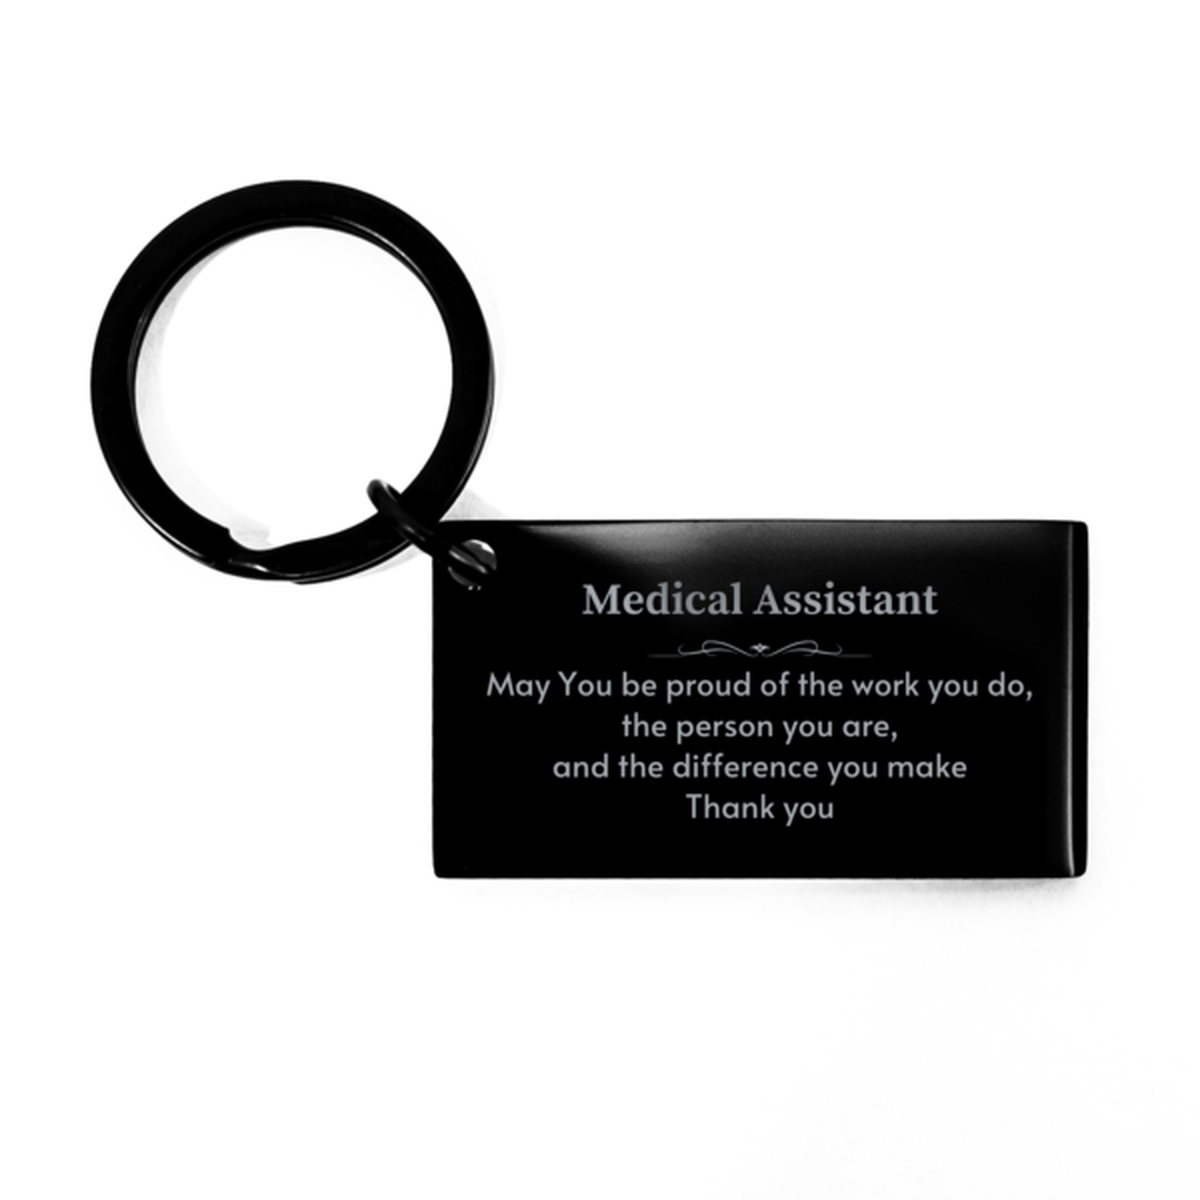 Heartwarming Keychain Retirement Coworkers Gifts for Medical Assistant, Operator May You be proud of the work you do, the person you are Gifts for Boss Men Women Friends